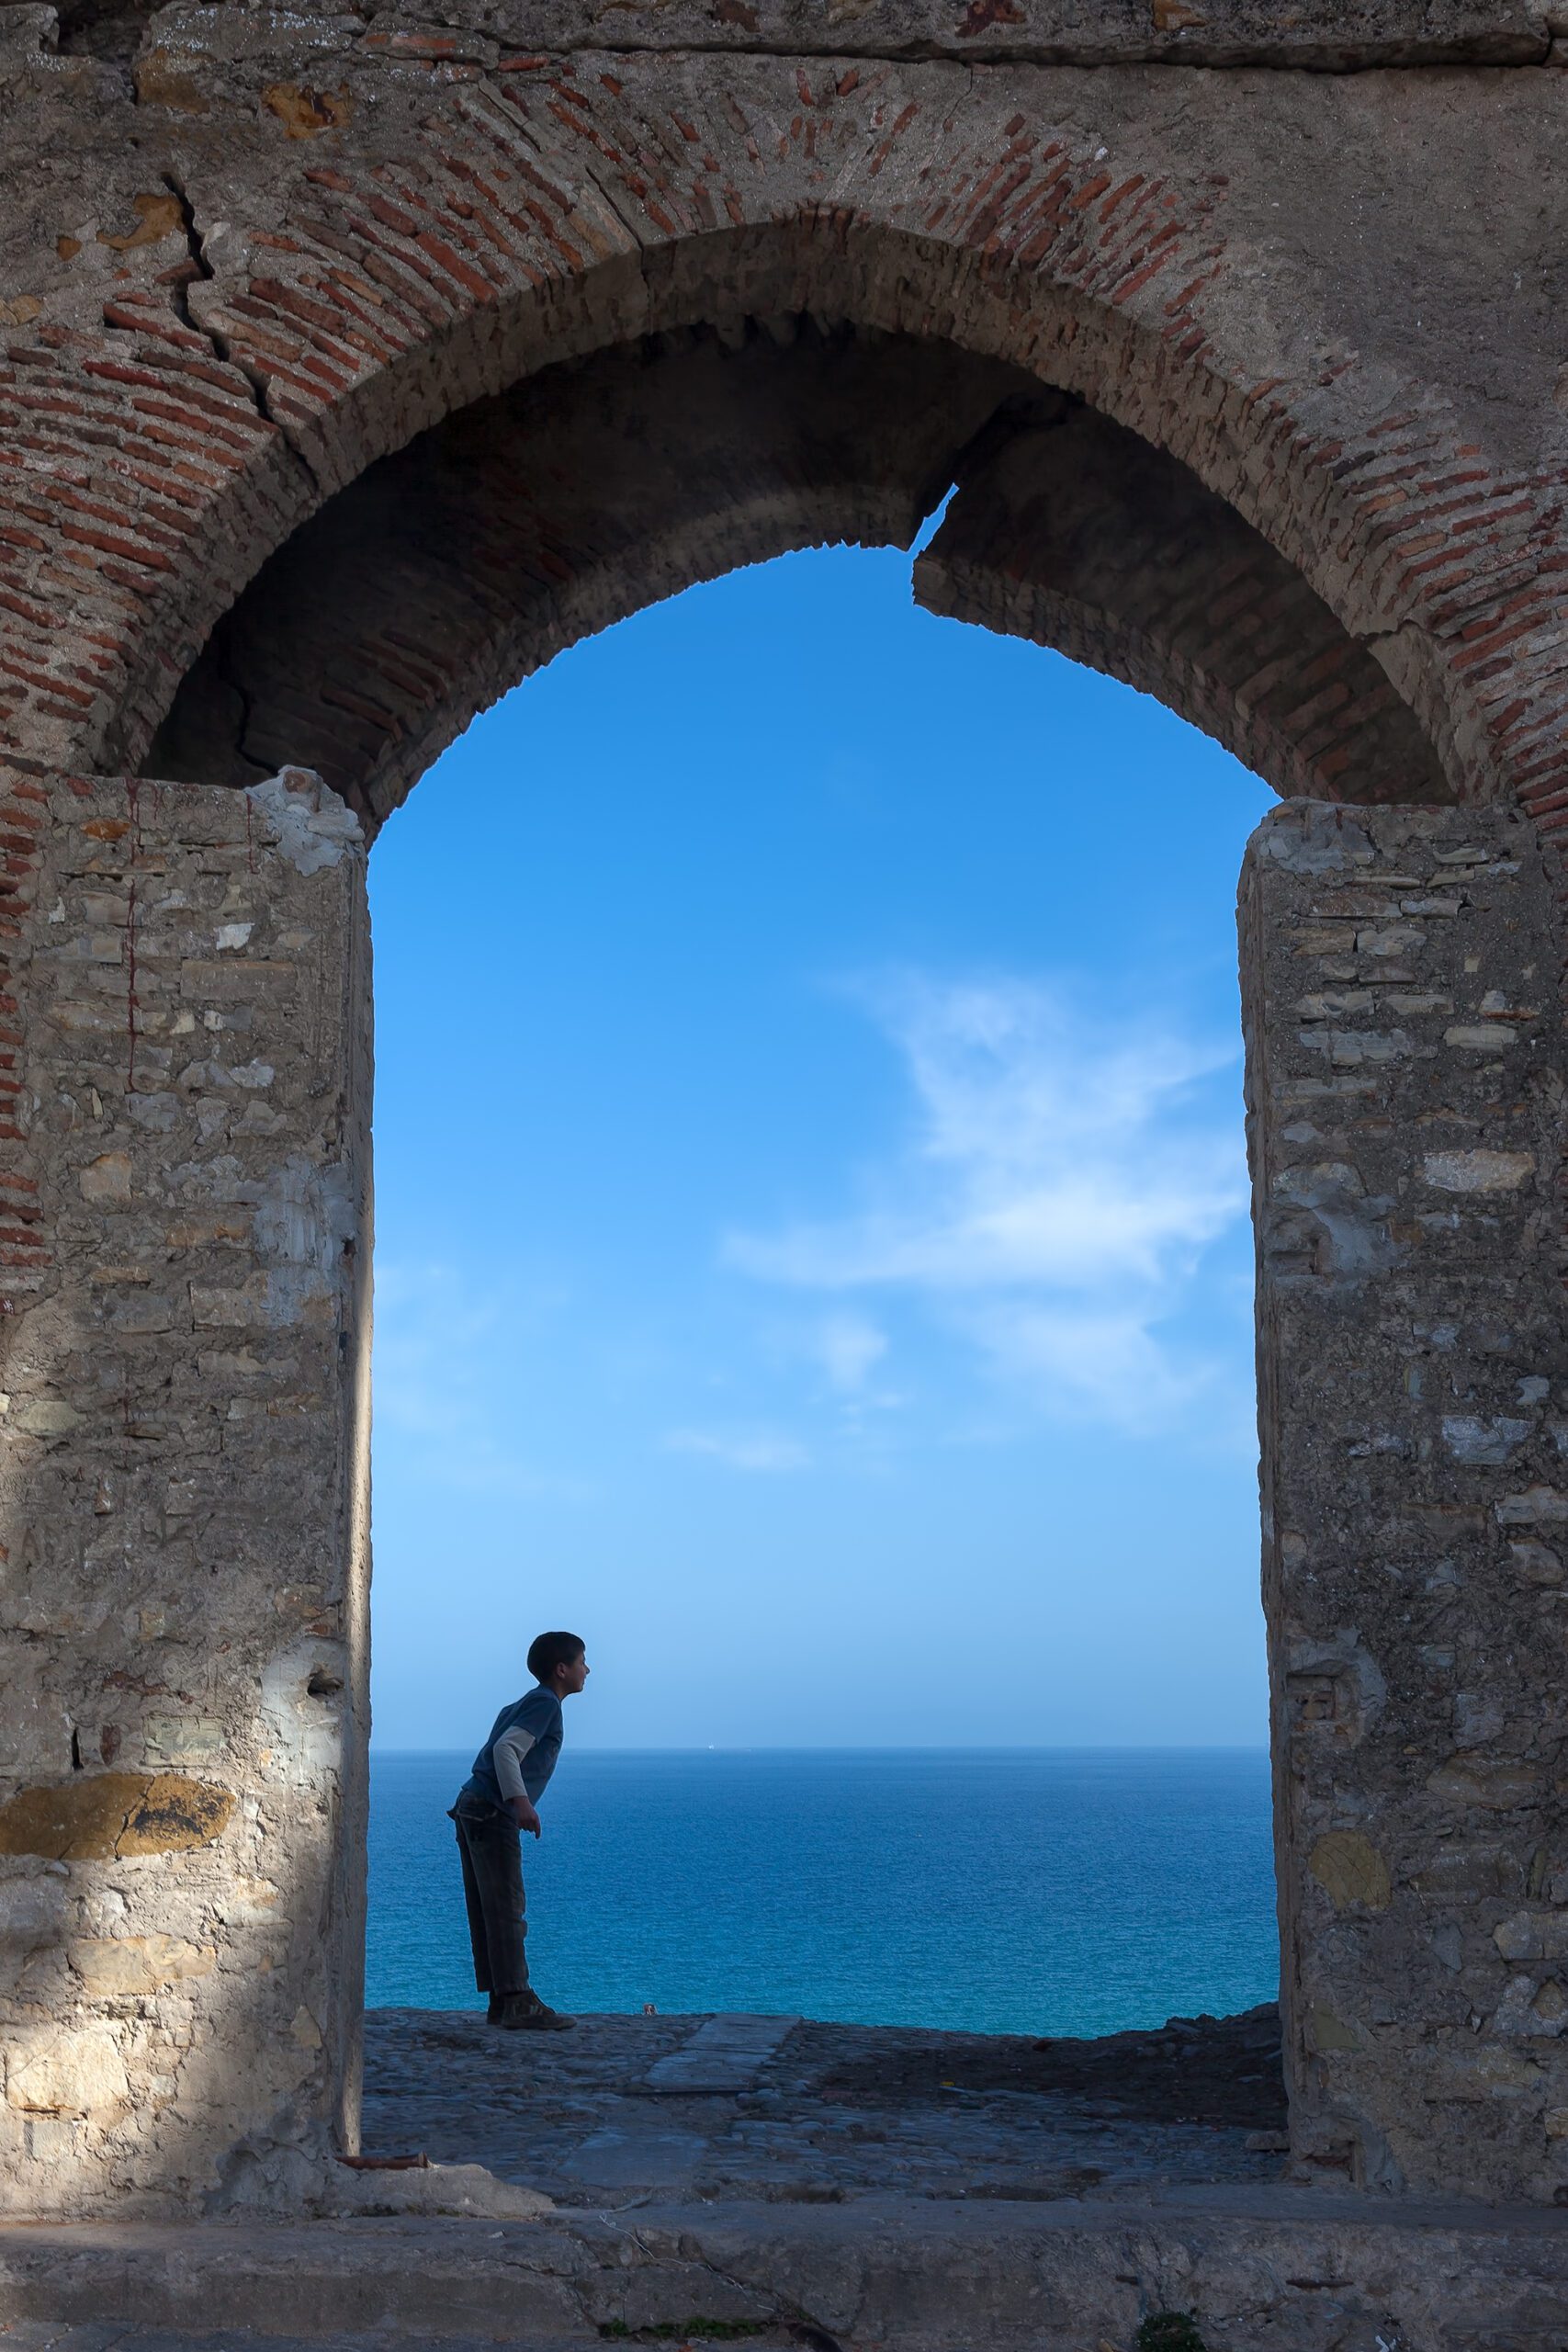 Young boy contemplating under historic Tangier arch with vast ocean background.